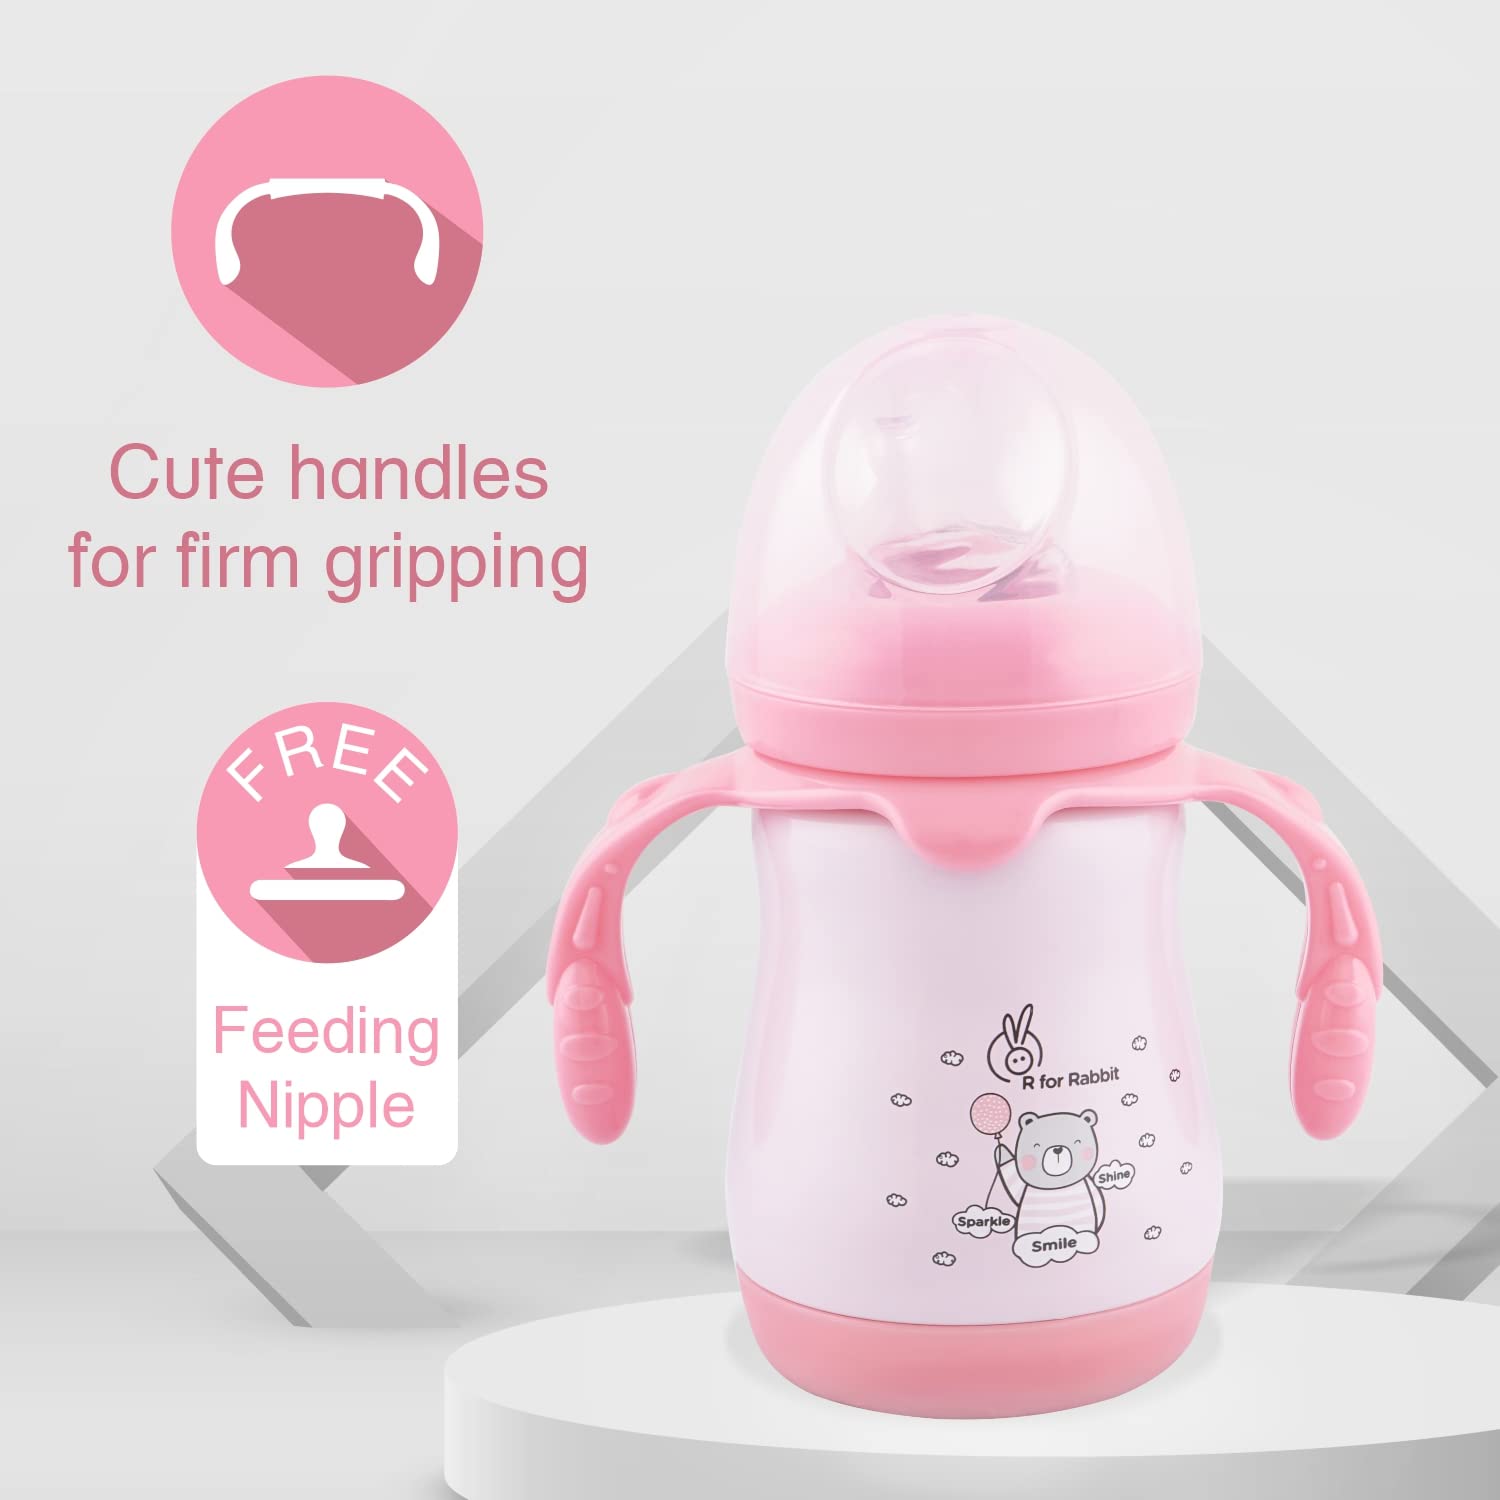 R FOR RABBIT Steebo Teddy Stainless Steel Feeding Bottle With Twin Handle - Pink, 210ml